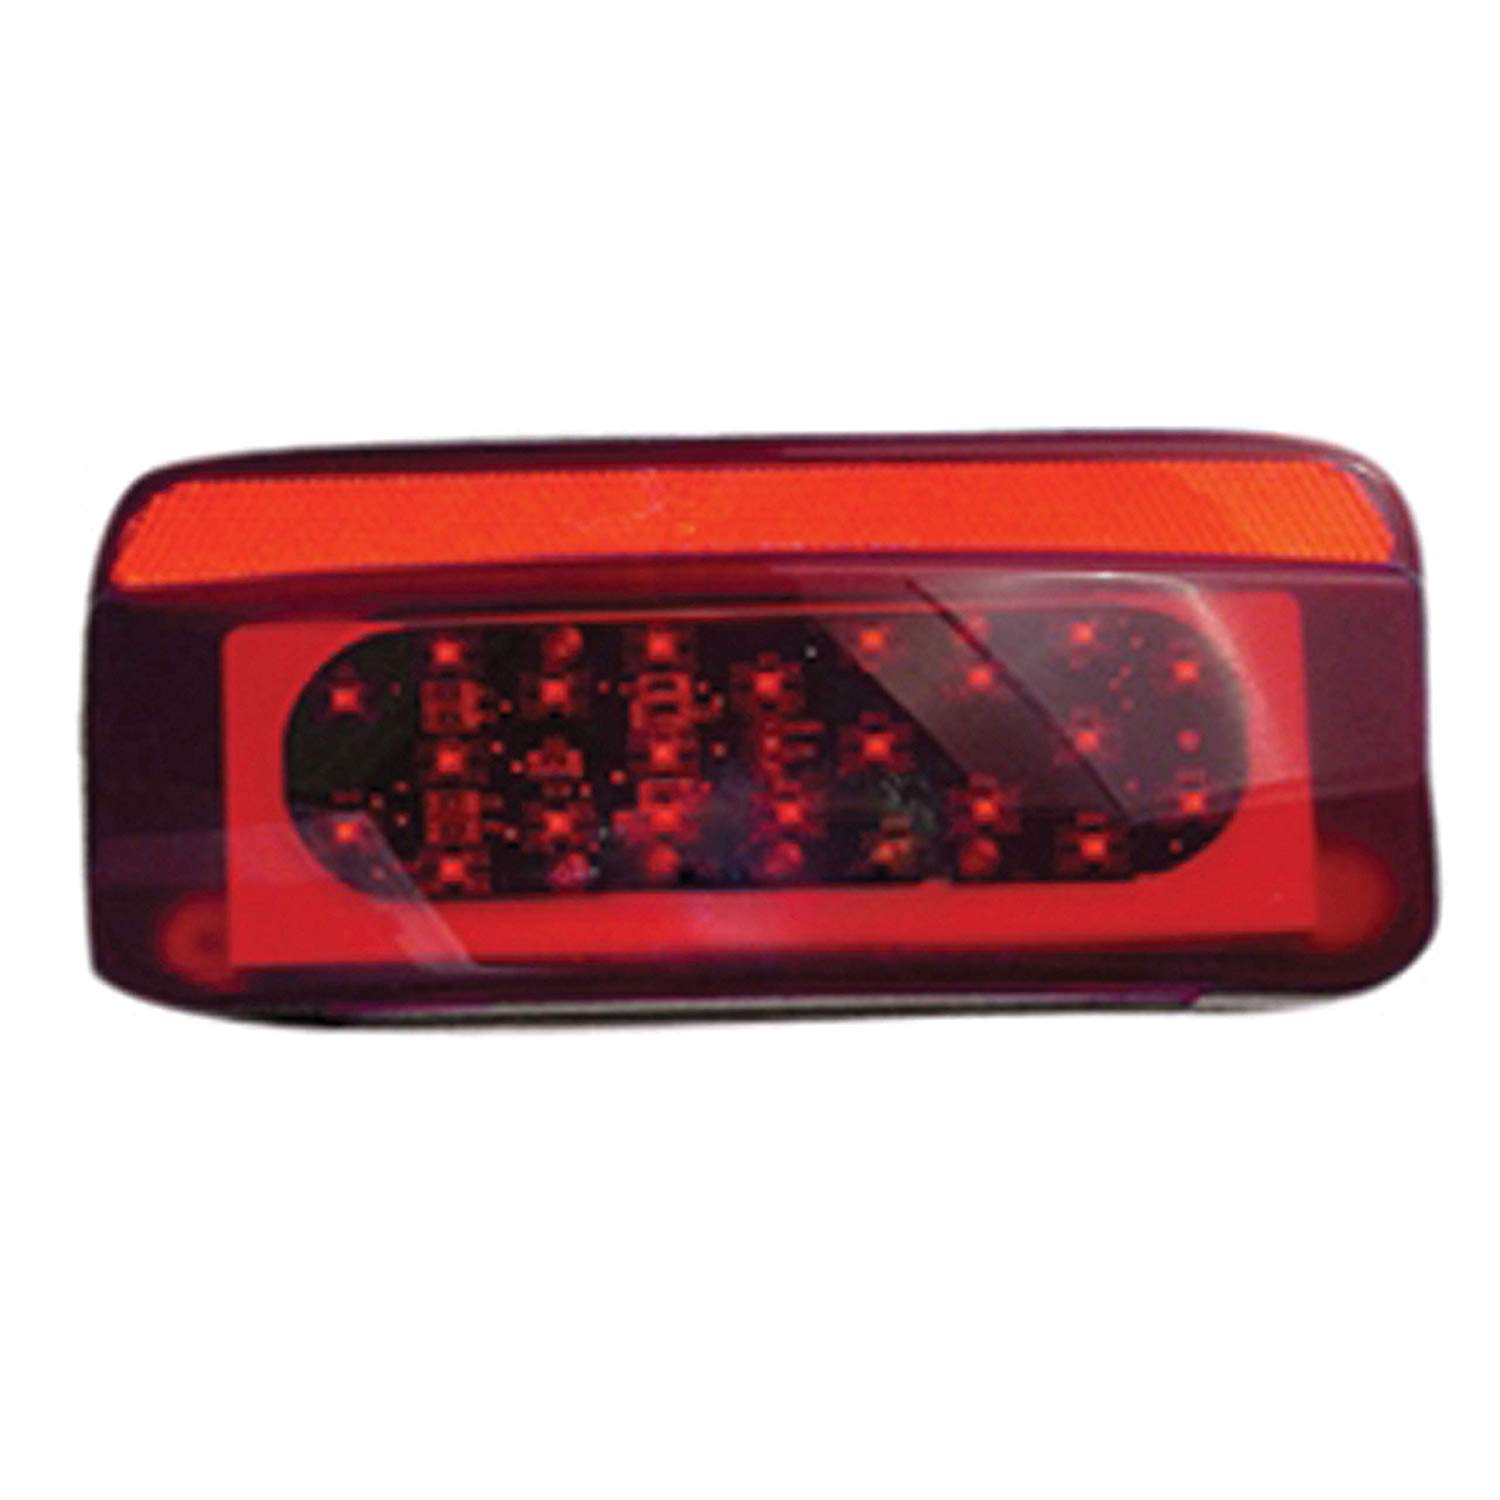 Fasteners Unlimited 003-81M1 LED Surface Mount Tail Light